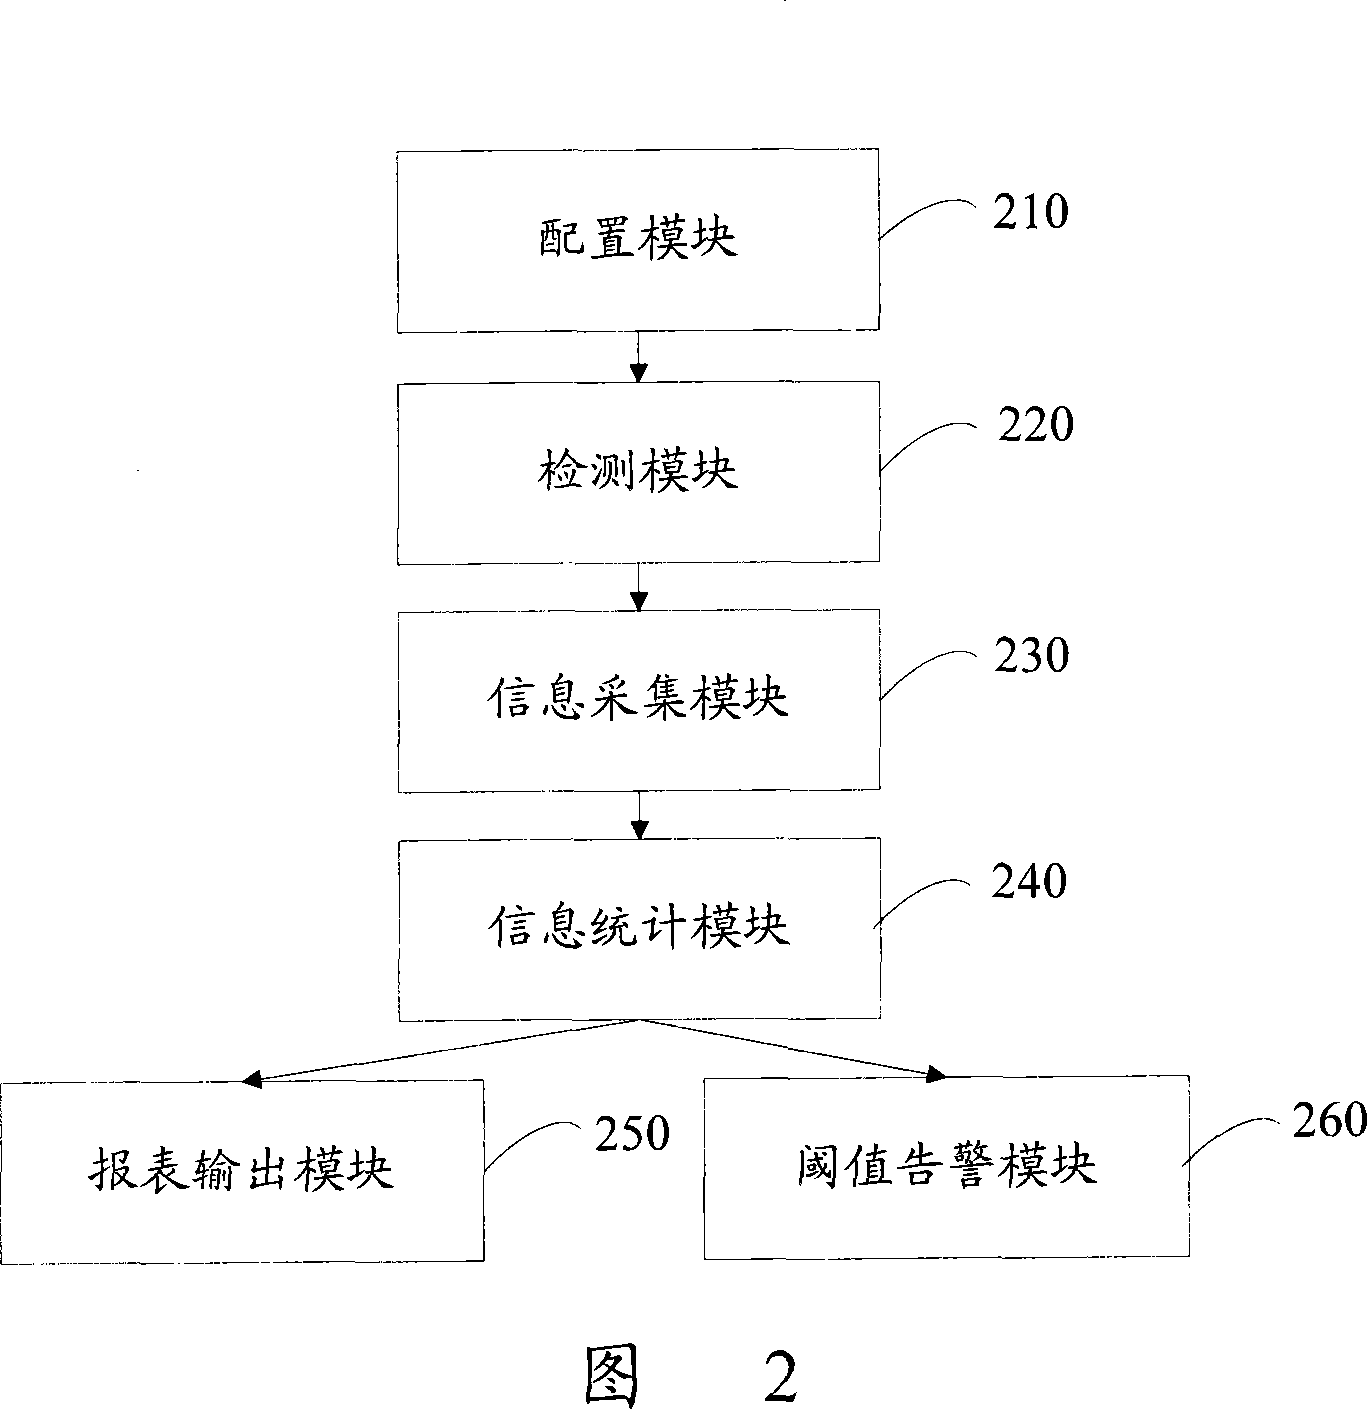 Method and system for implementing connectivity detection